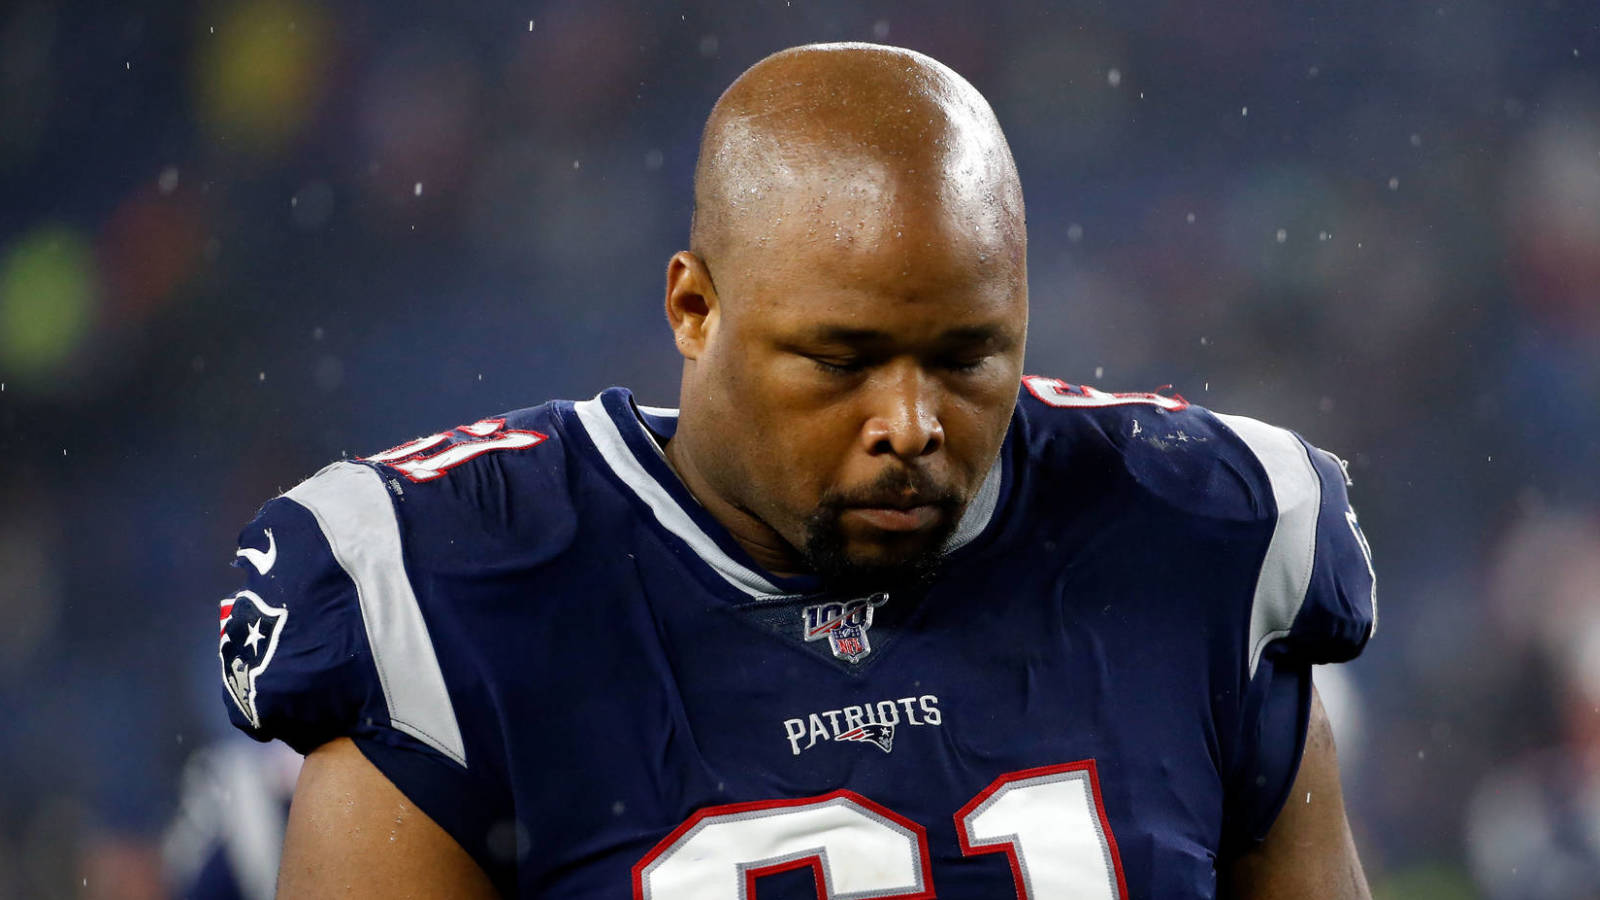 Report: Patriots trade Marcus Cannon to Texans